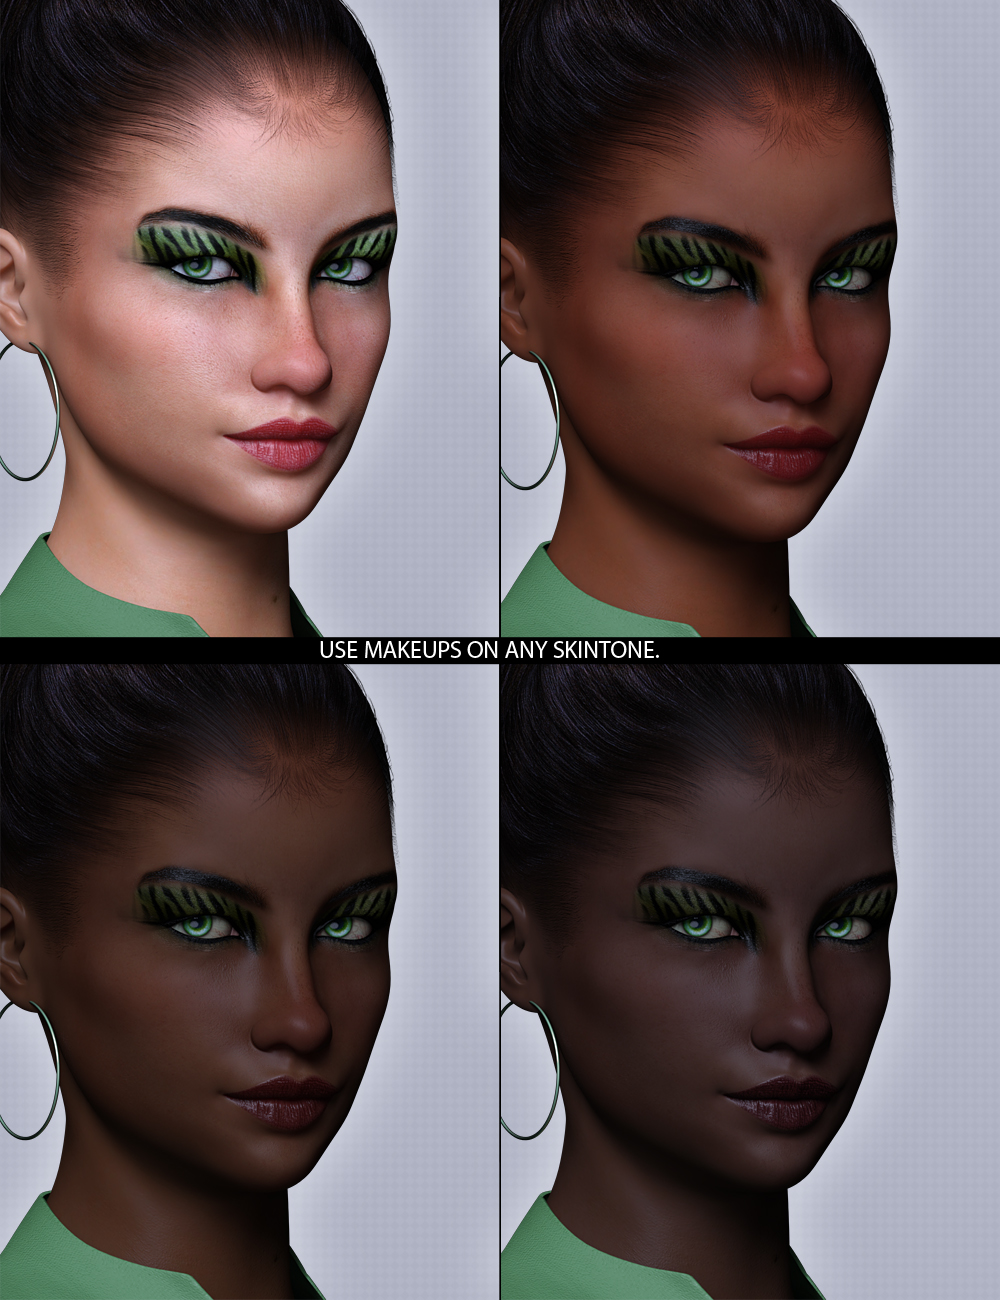 Millicent for Victoria 8 by: ForbiddenWhispers, 3D Models by Daz 3D